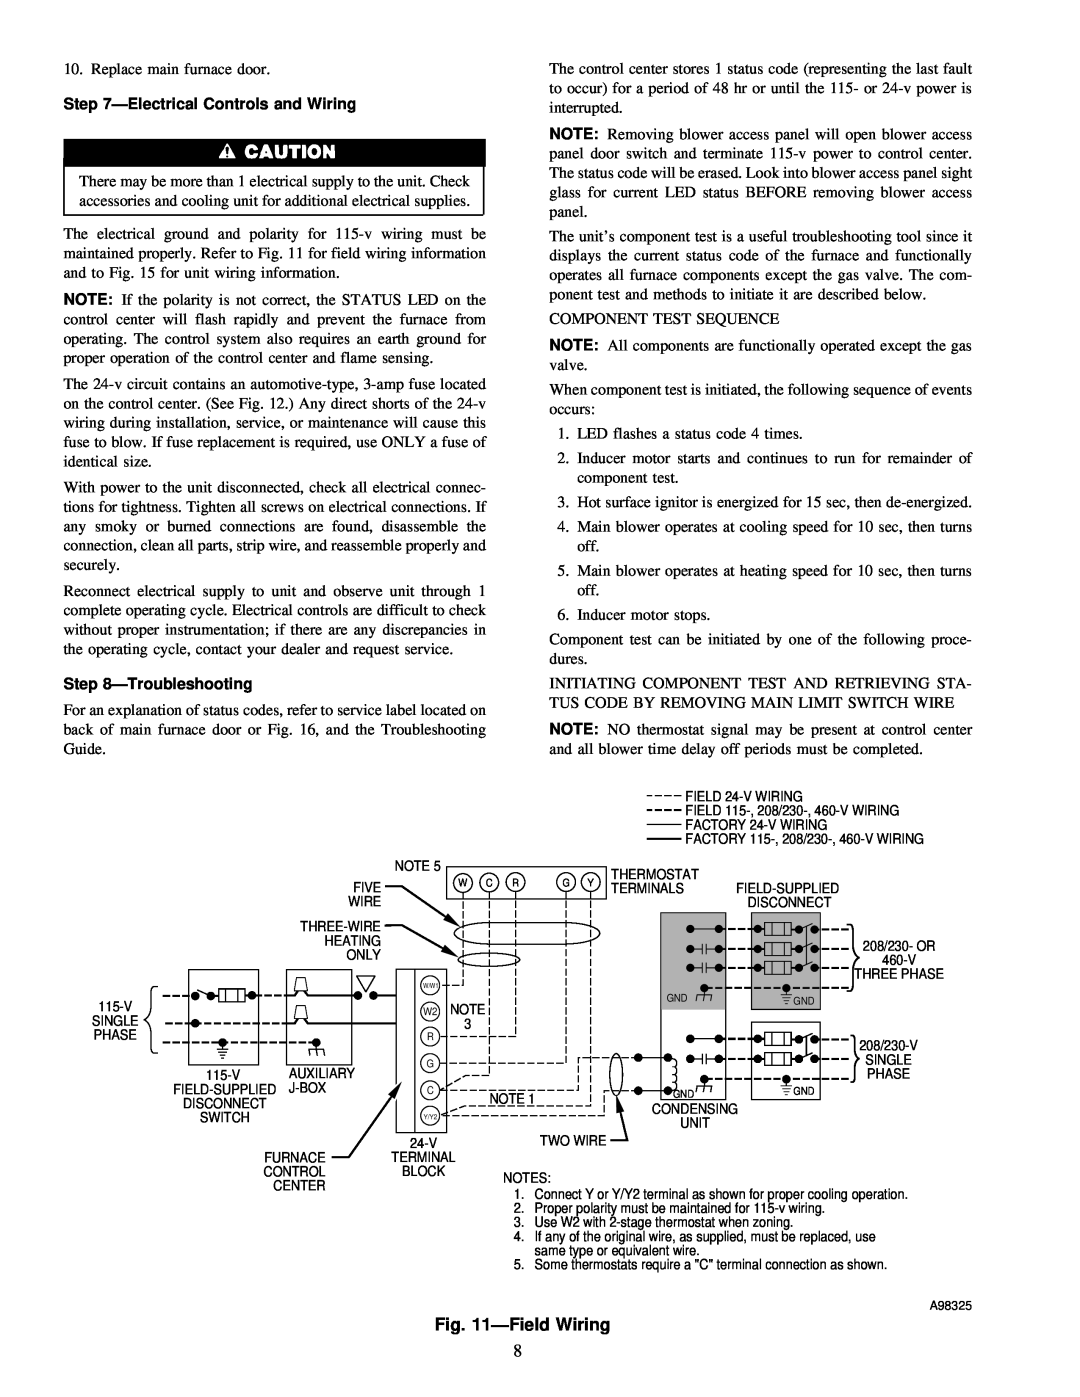 Carrier 58MXA instruction manual ÐField Wiring, ÐElectrical Controls and Wiring, ÐTroubleshooting 